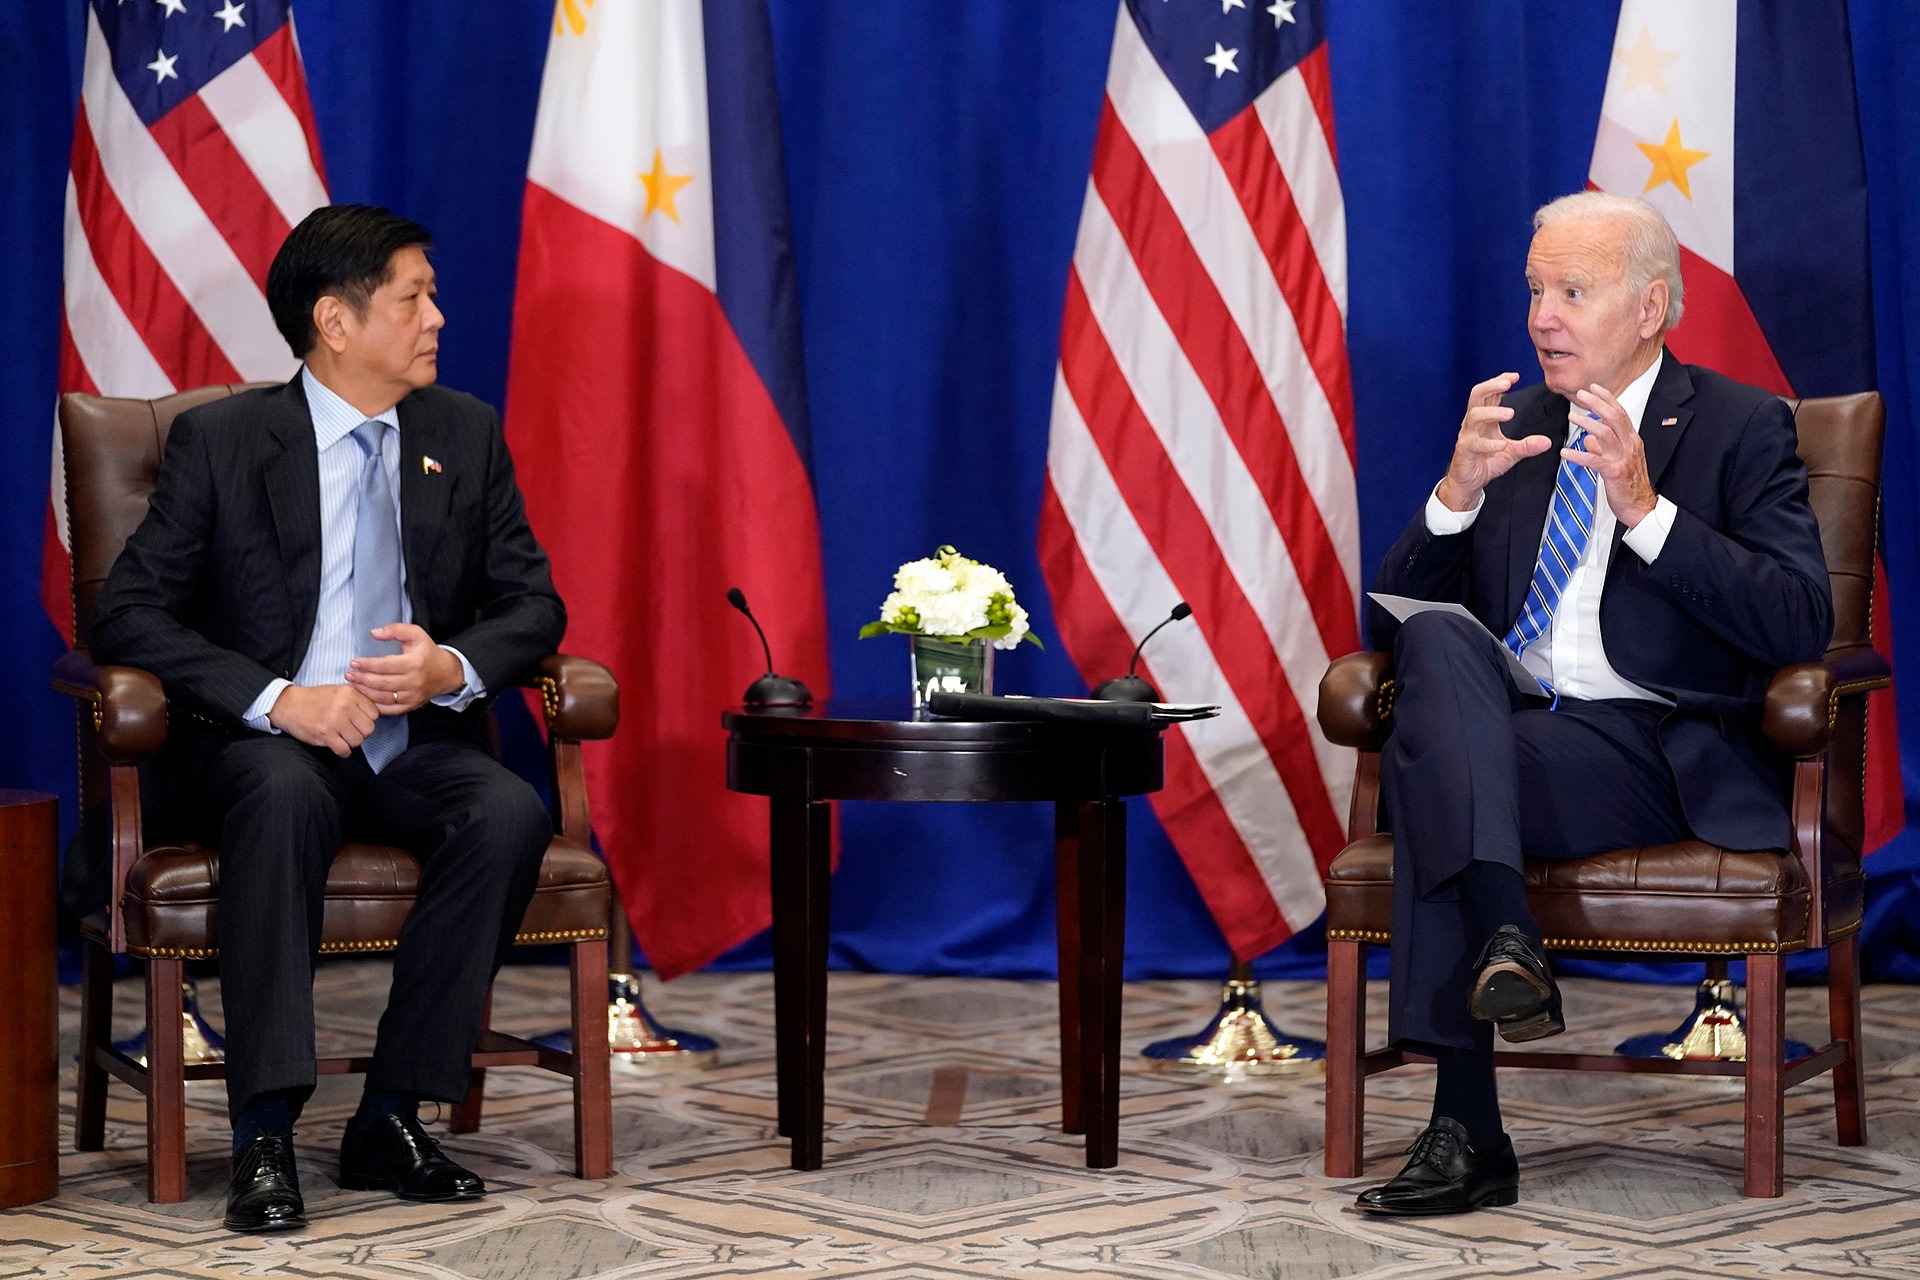 Biden seeks closer ties with Philippines after ‘rocky’ past